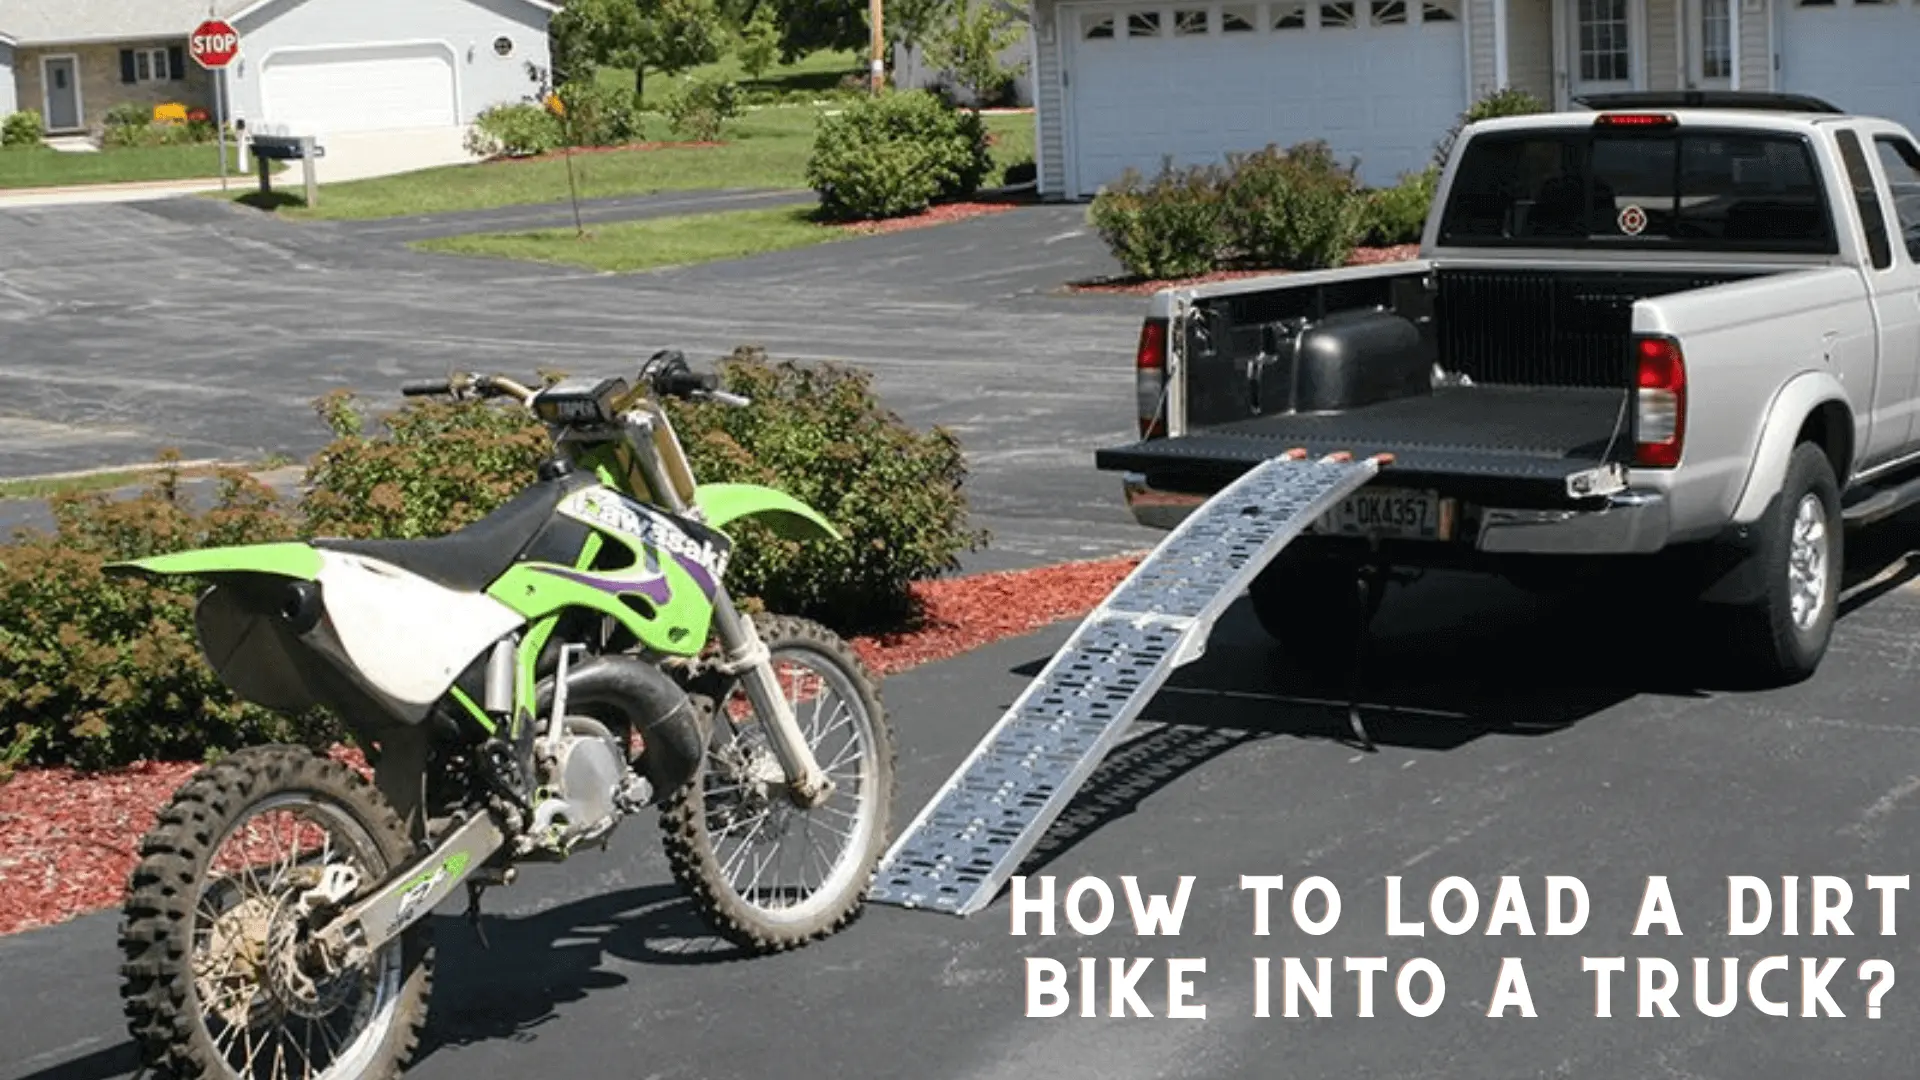 How to Load a Dirt Bike into a Truck?